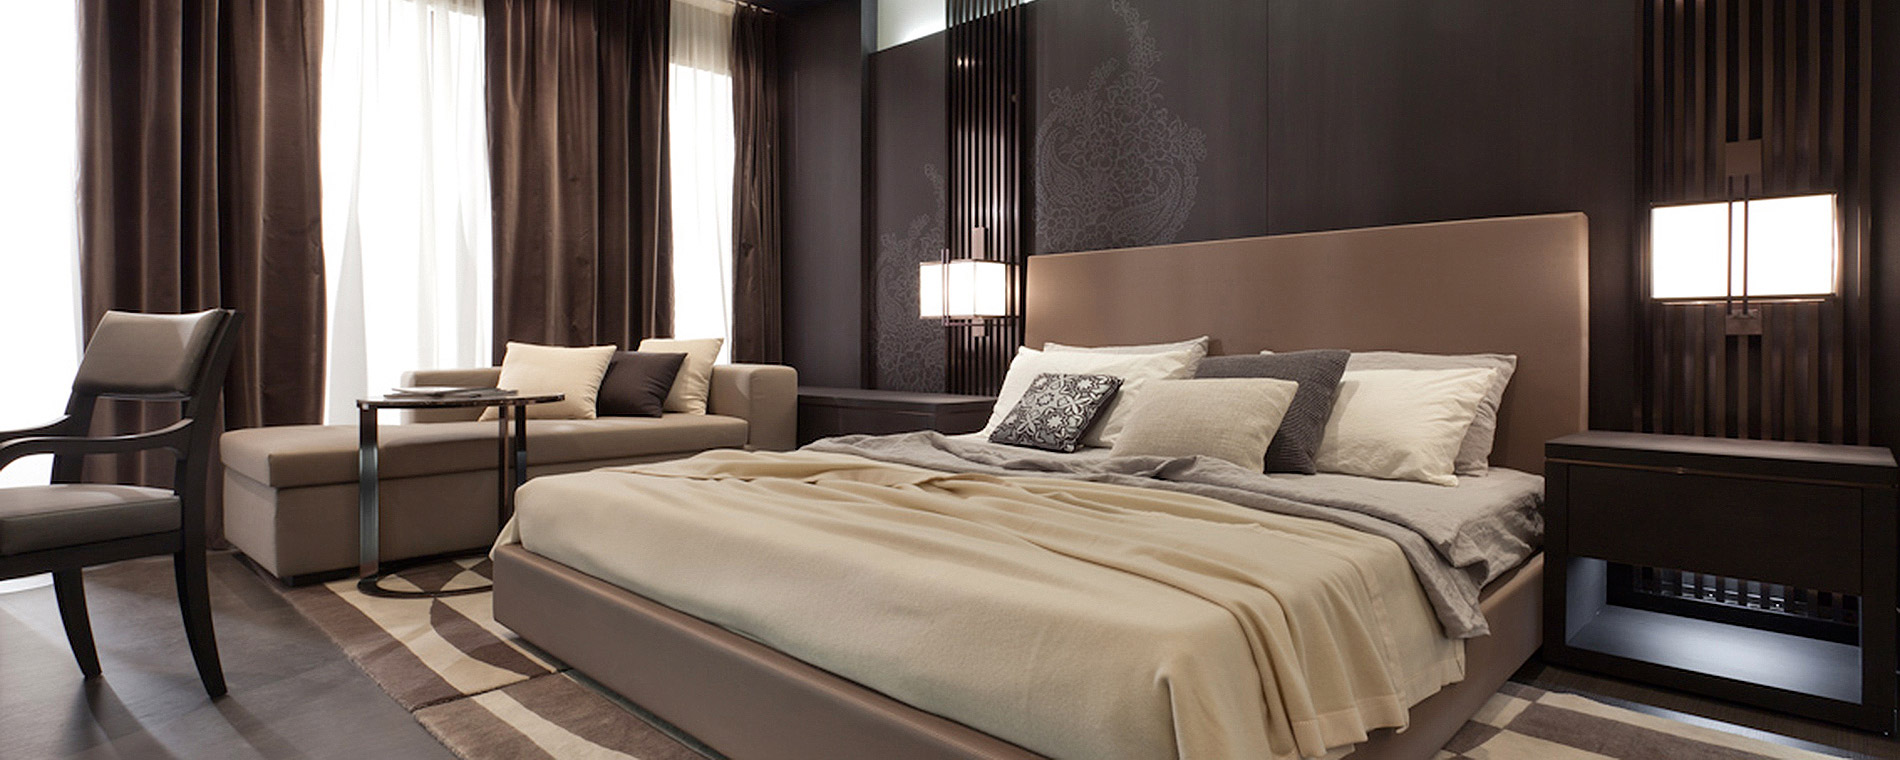 seating, beds, curtains and wall coverings